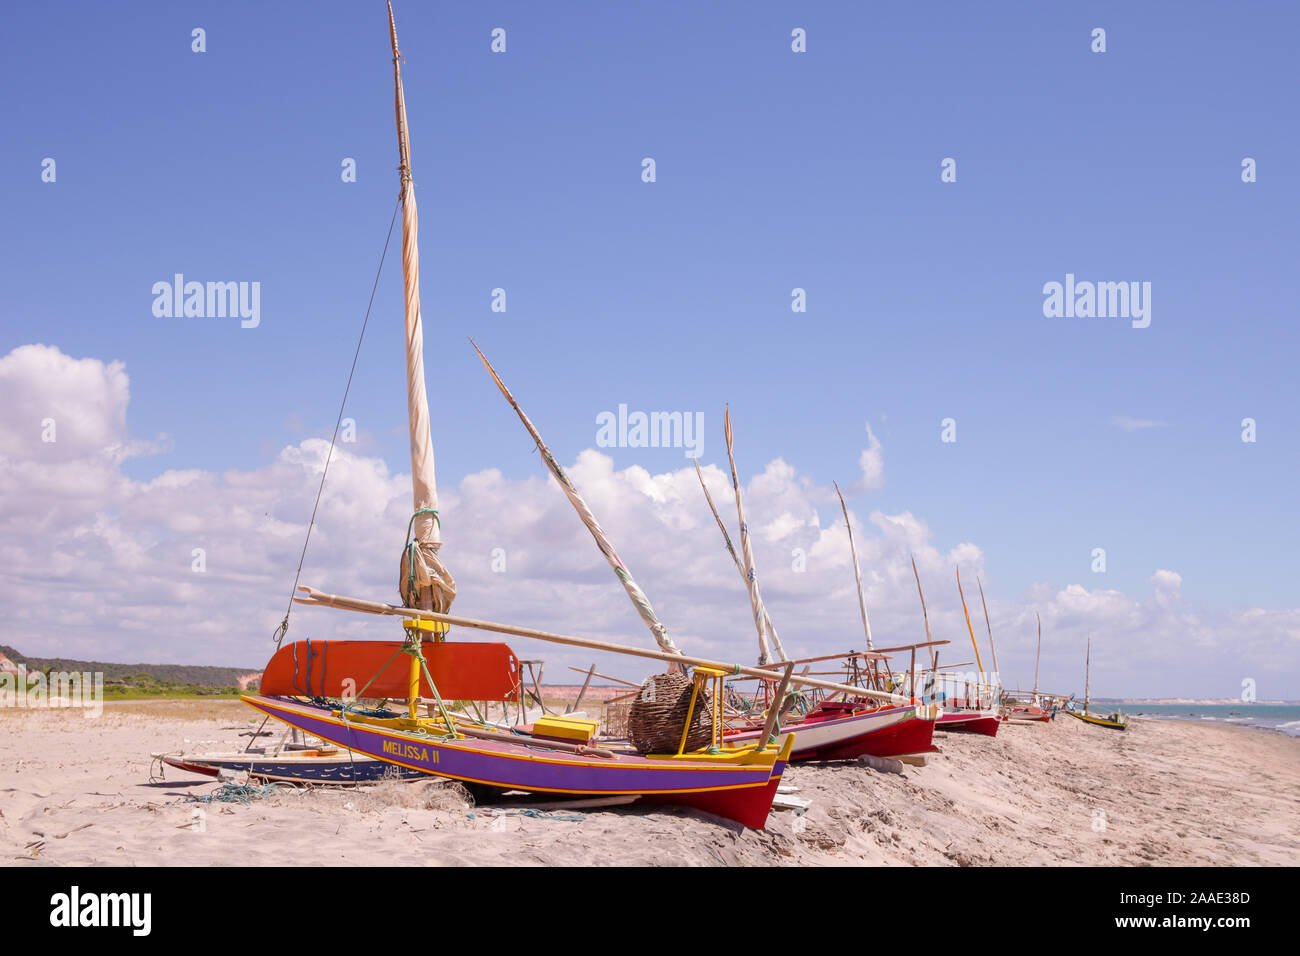 scenes from the coast of the Ceará state in northeastern Brazil Stock Photo